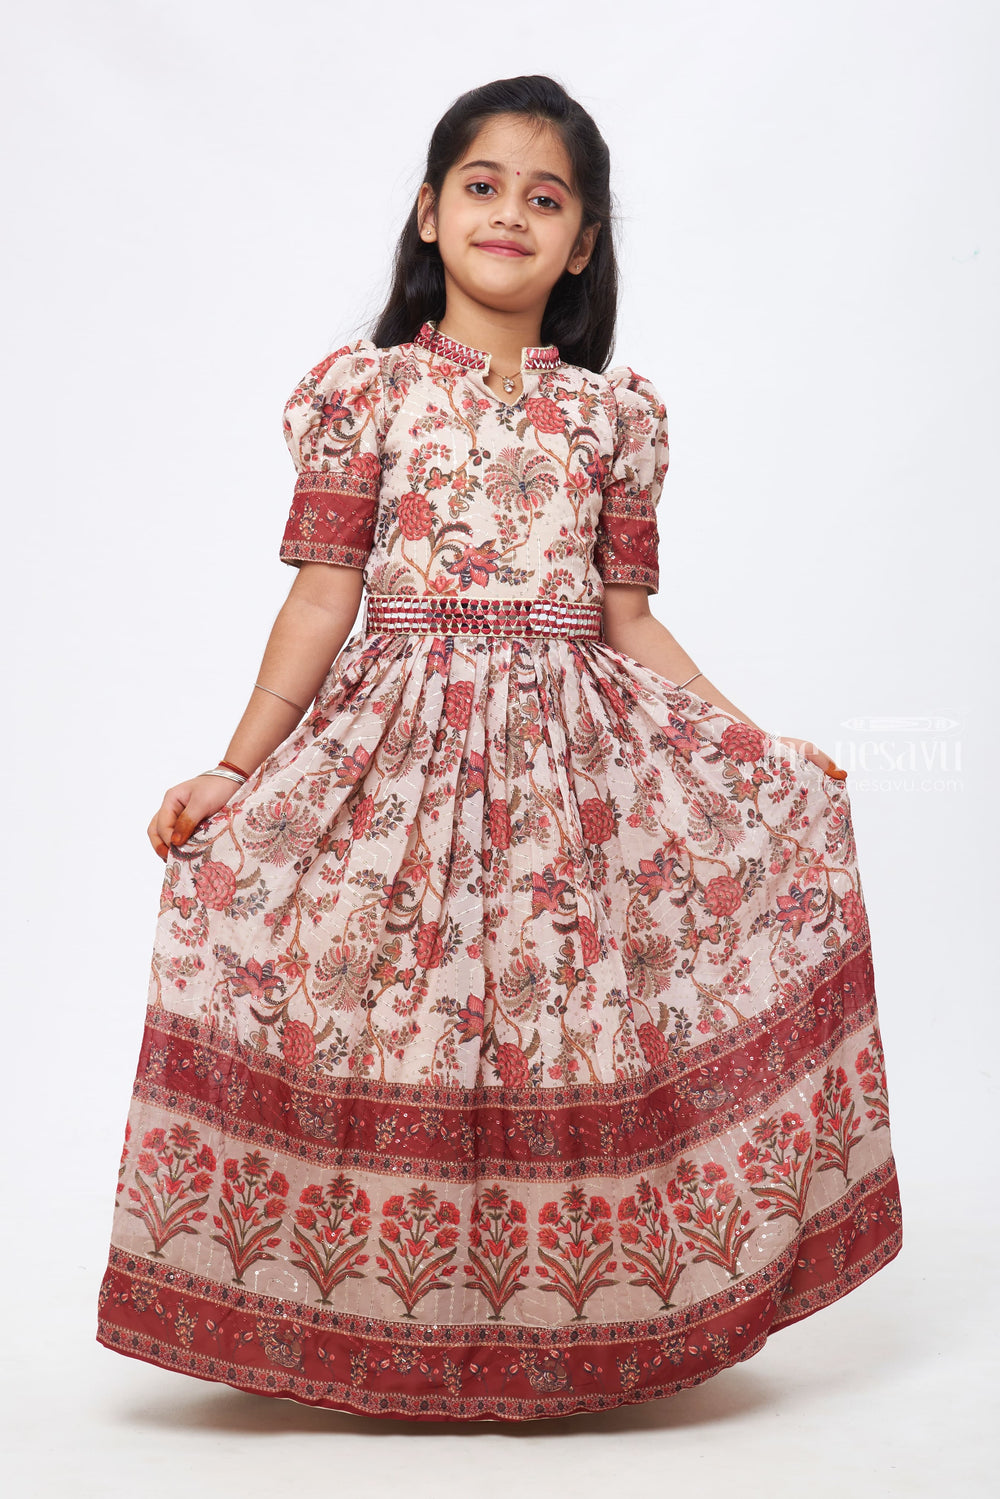 The Nesavu Girls Party Gown Mystic Blossom: Sequin Embroidered Floral Printed Maroon Childrens Gown Nesavu A Dance of Fabric and Design | Luxurious Anarkali Gowns | The Nesavu